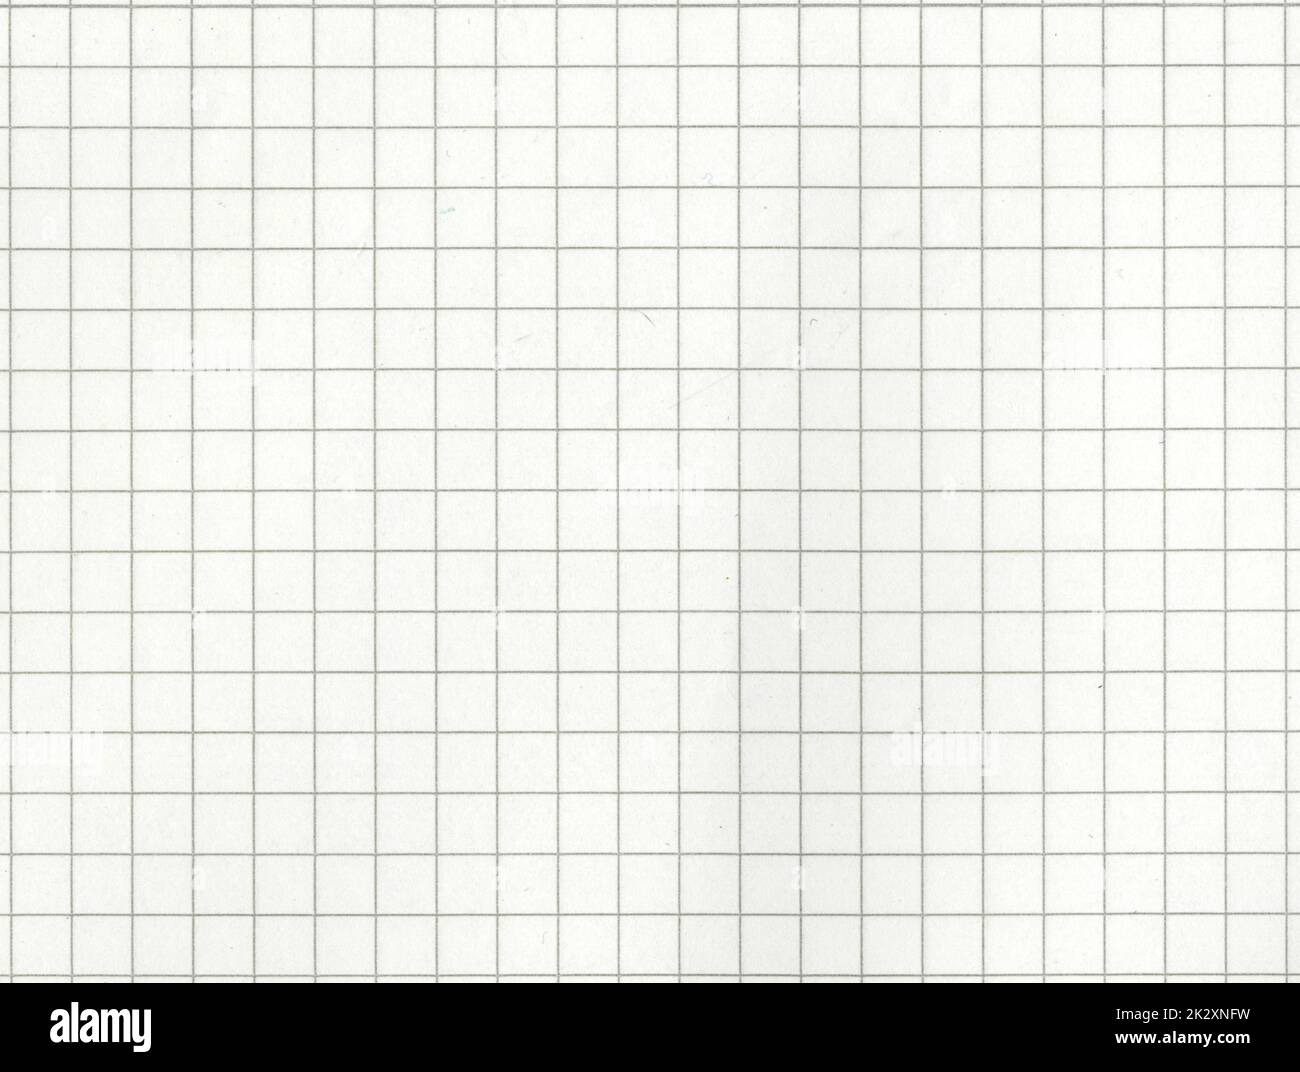 High resolution large image of a white uncoated checkered graph paper scan weathered beige tint thin textbook paper page with gray checkers copy space for text for presentation high quality wallpaper Stock Photo